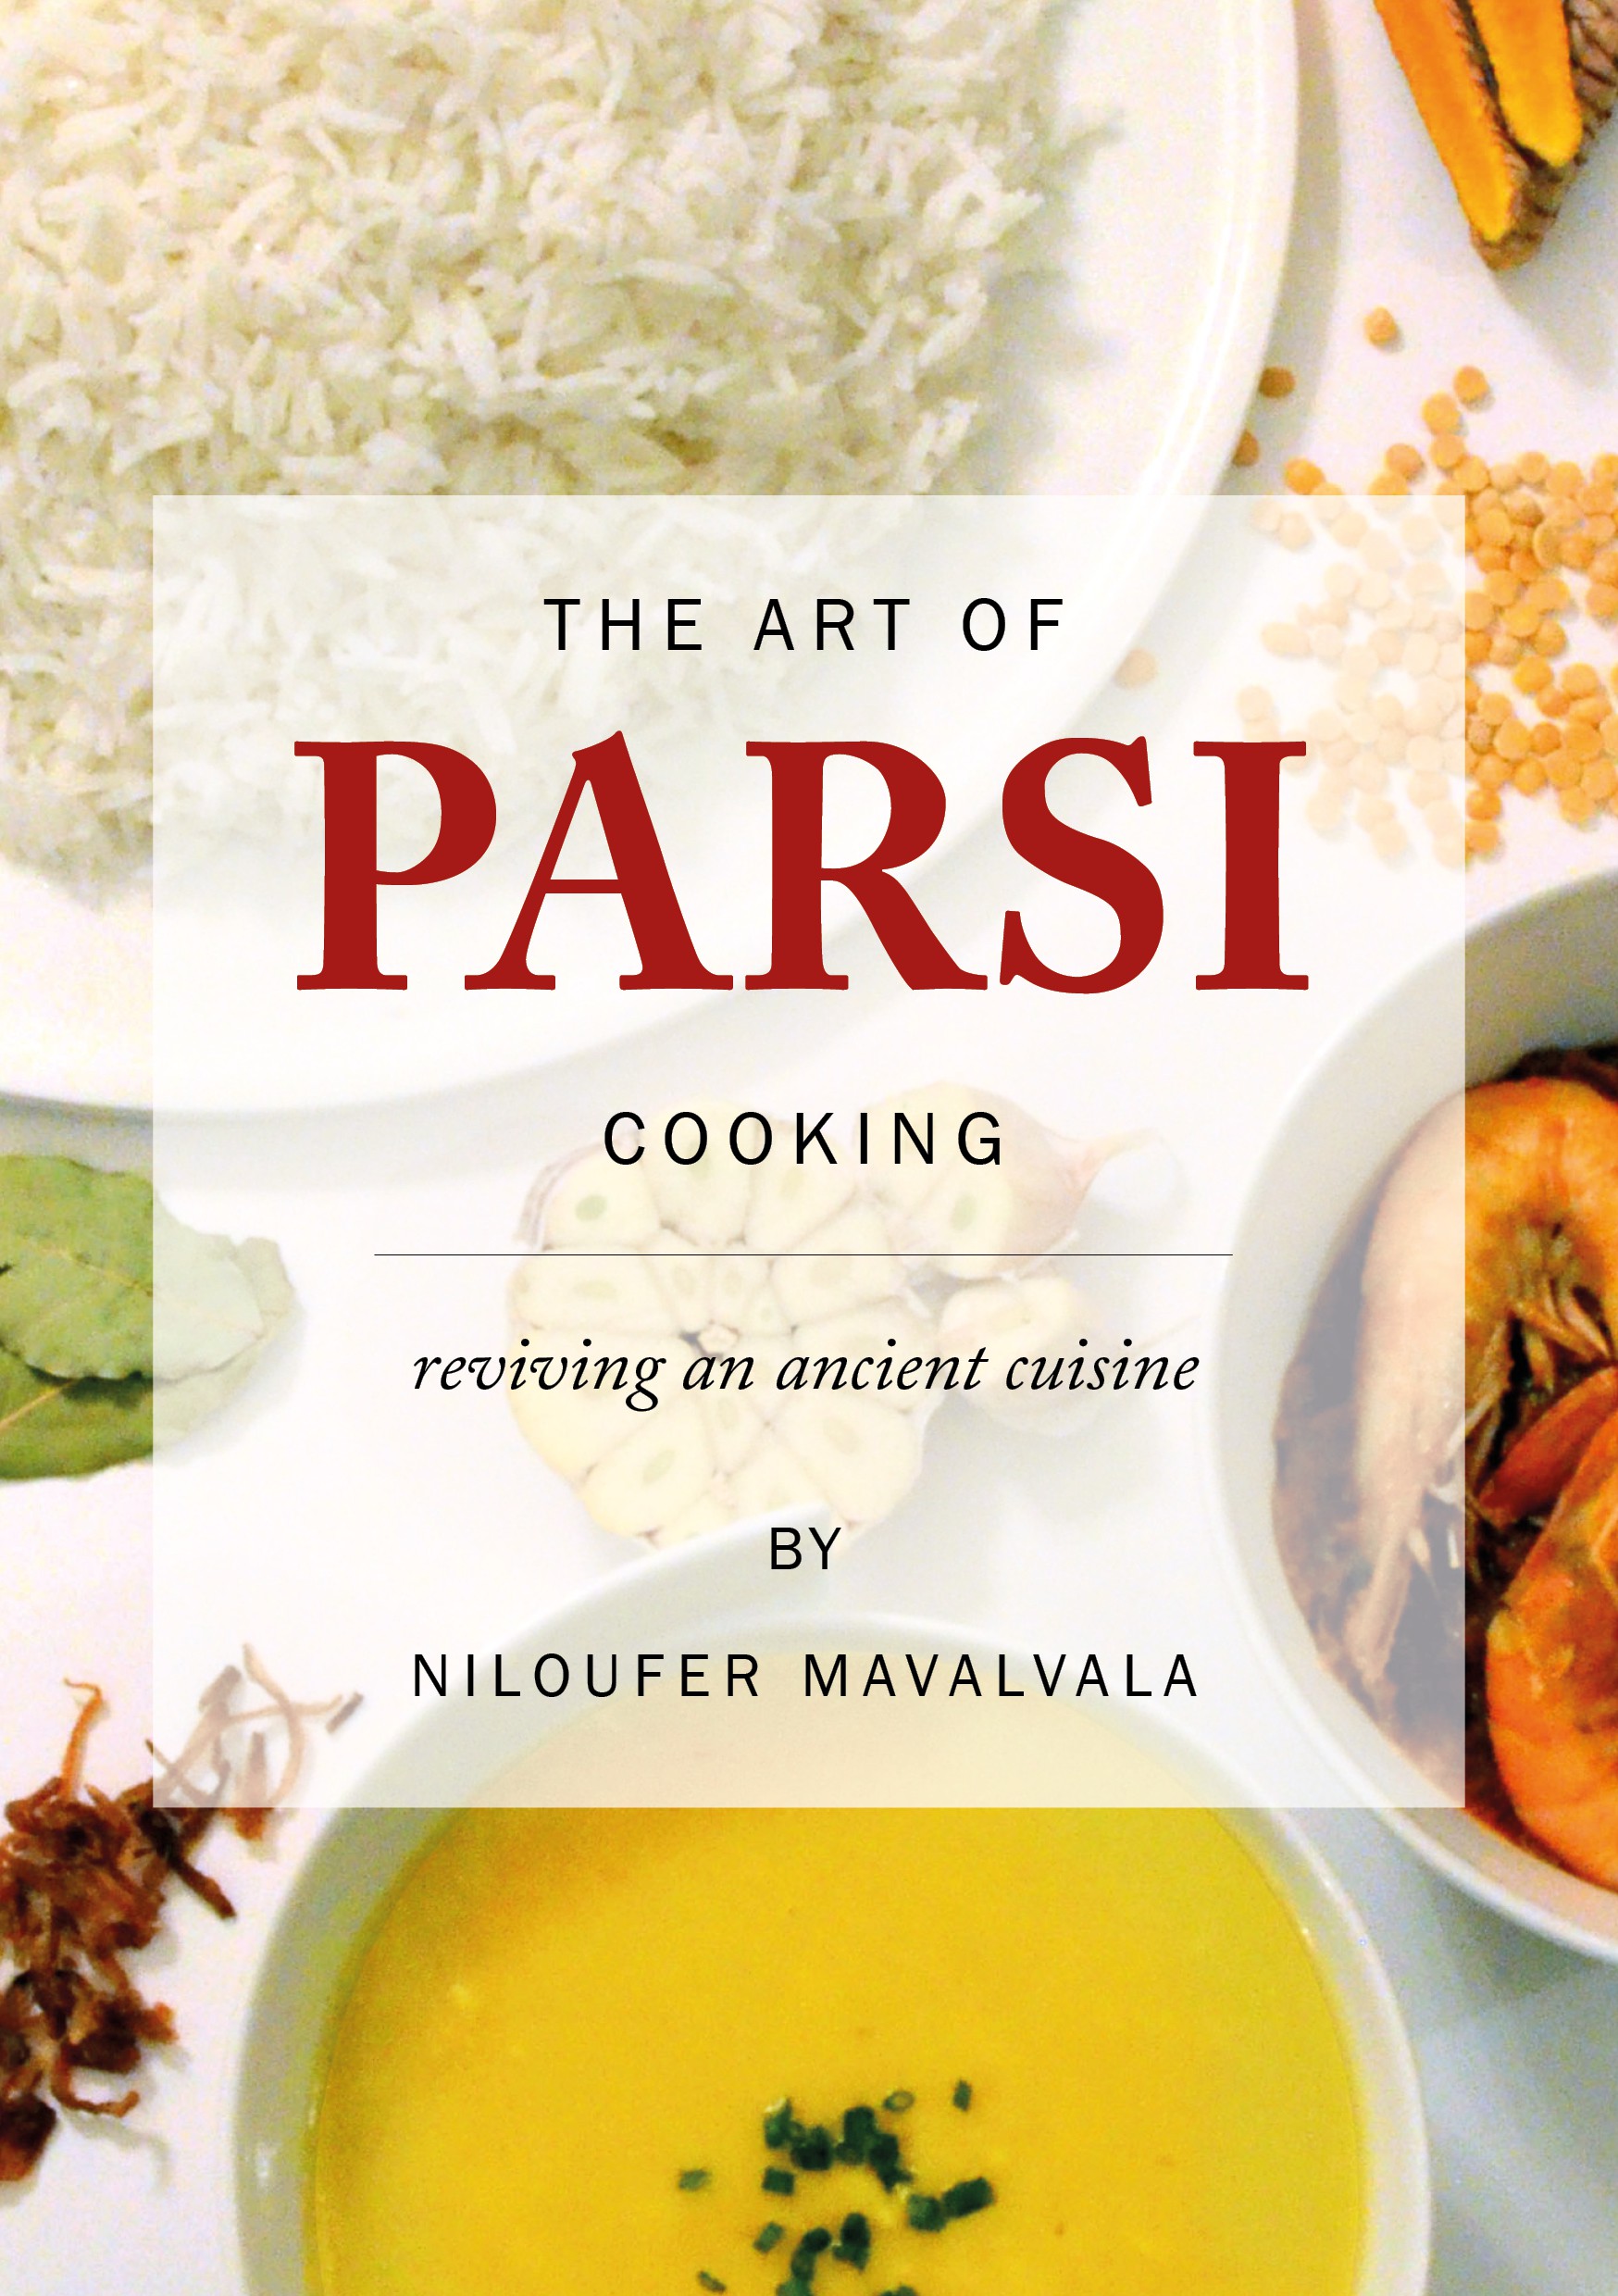 Niloufer Mavalvala is reviewed by Indian Parsi Cuisine, Arts & Heritage